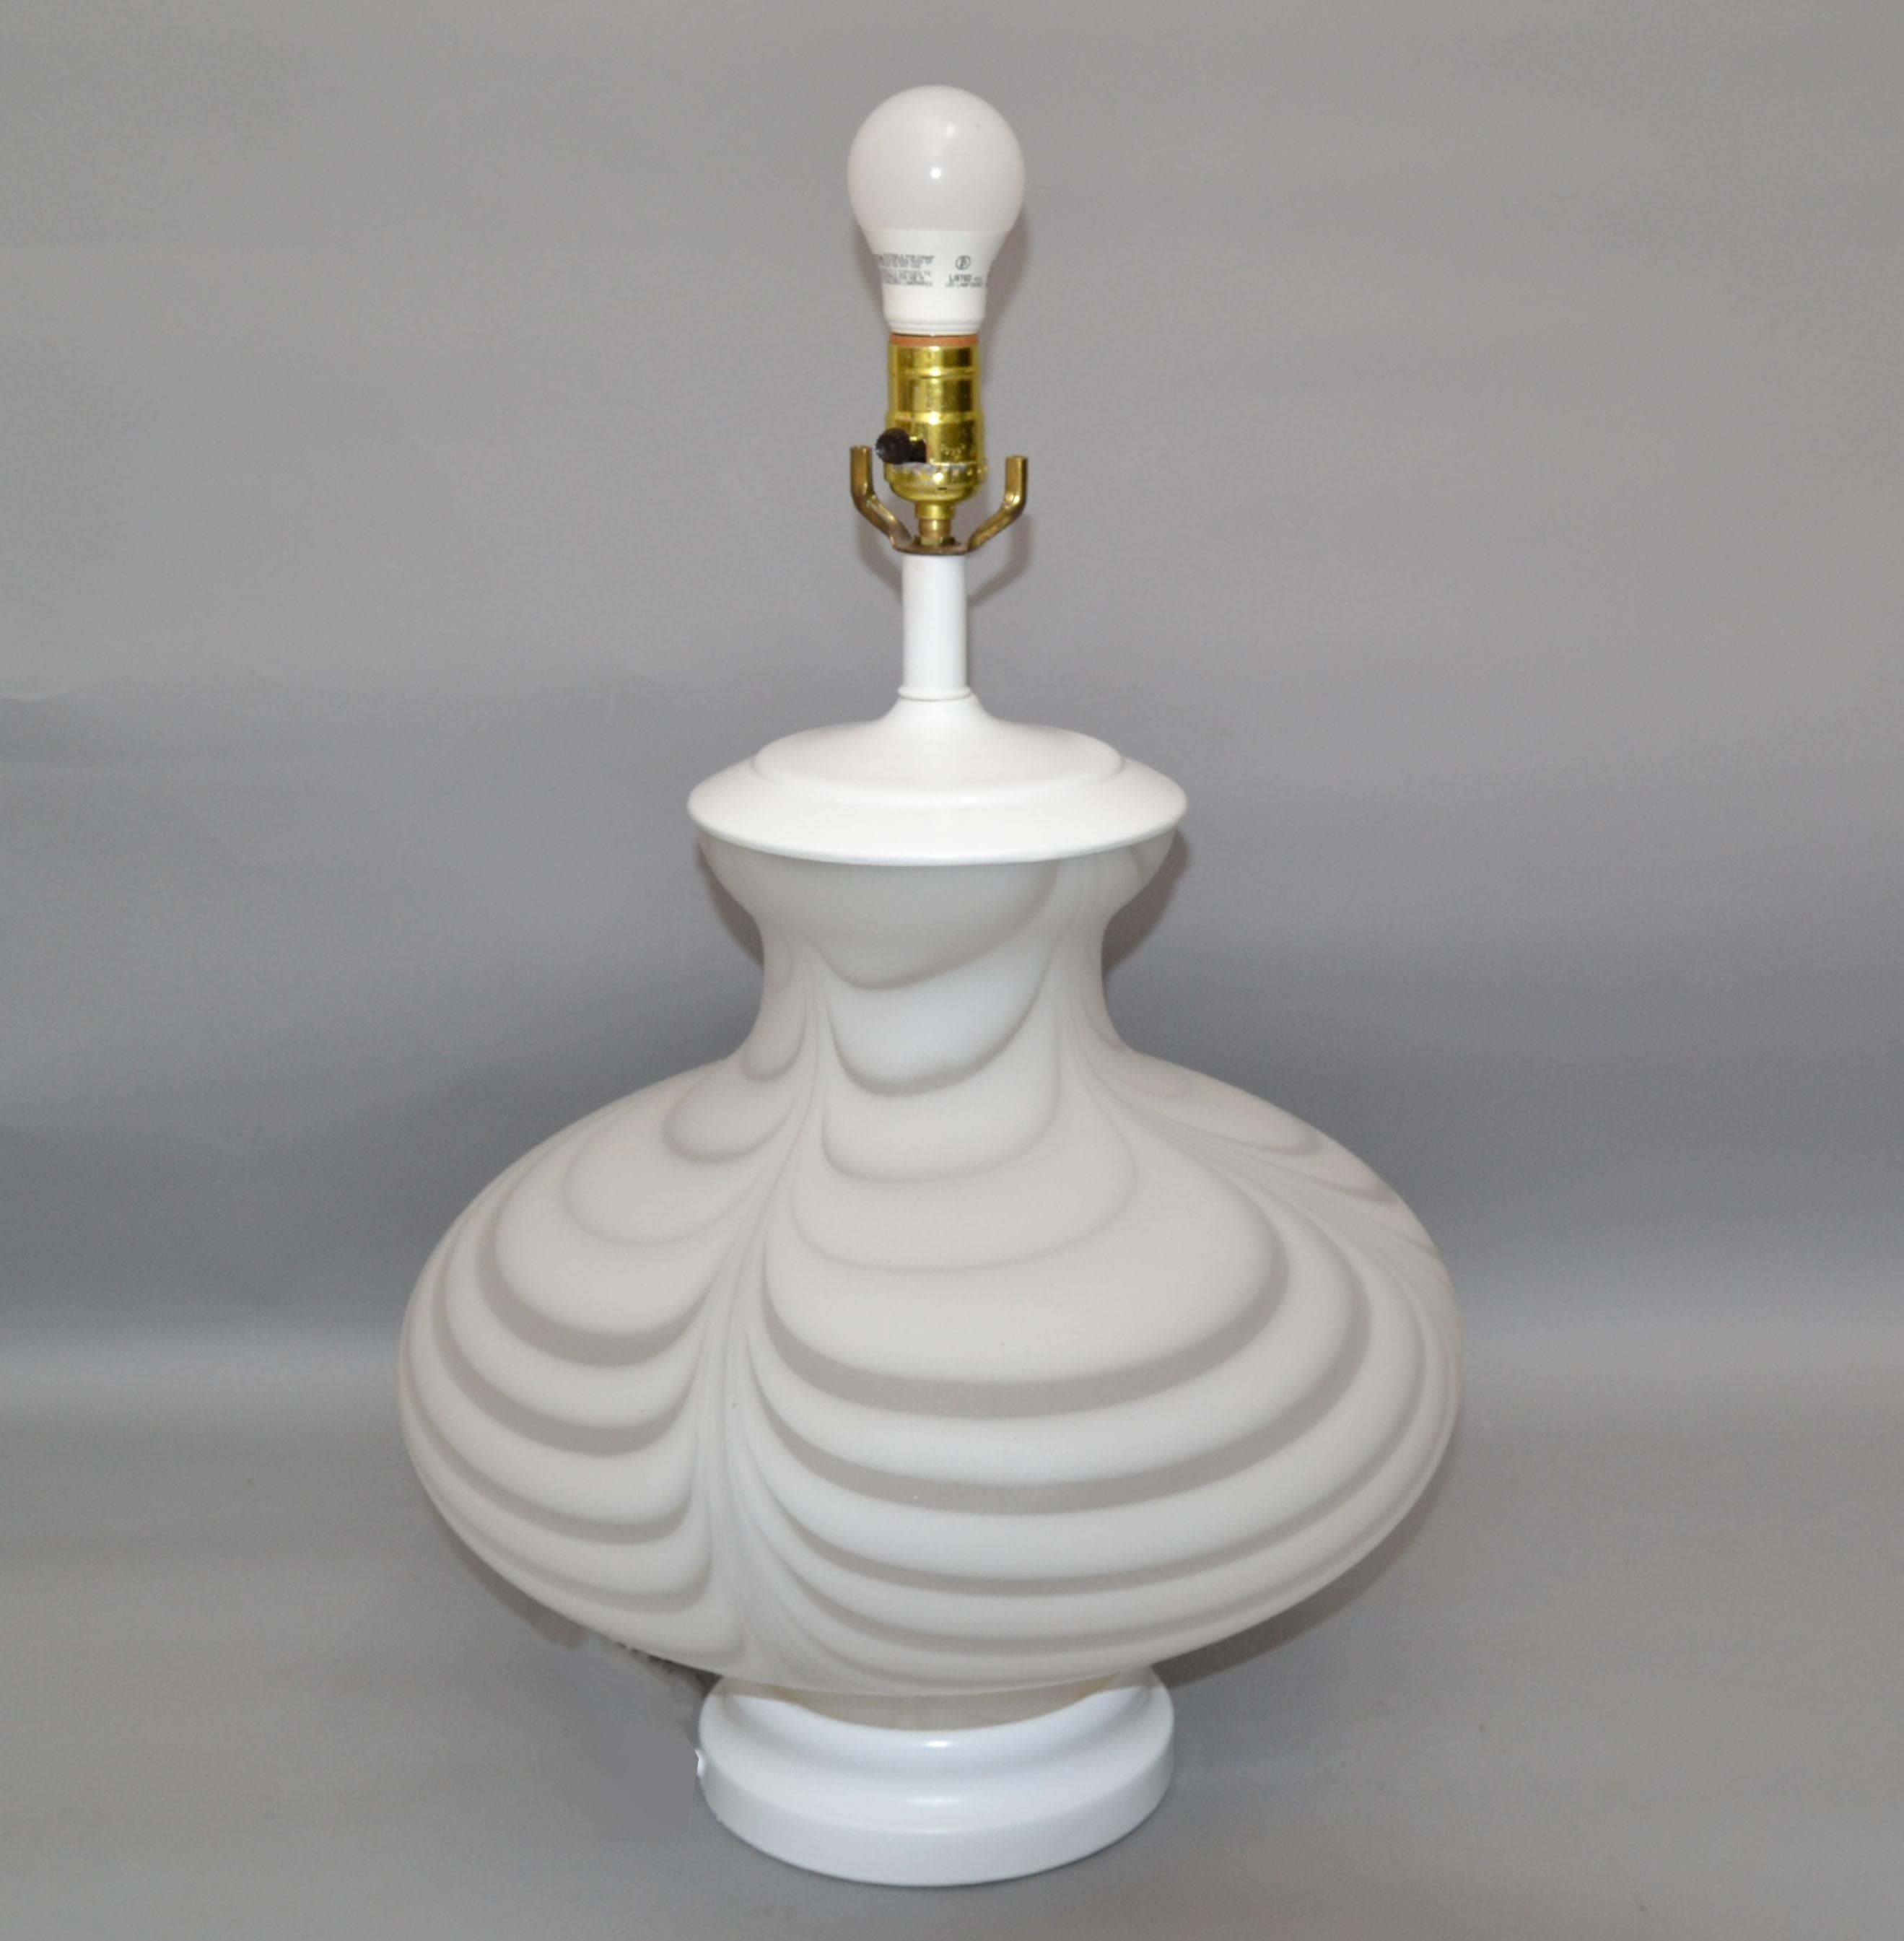 Stunning Italian Table Lamp in the Style of Mazzega. Manufactured, circa 1970 in mottled swirled white Murano glass with white Gloss Finish shaft and base.
Wired for the U.S. and takes 2 regular or LED light bulbs.
One for the inside and one on